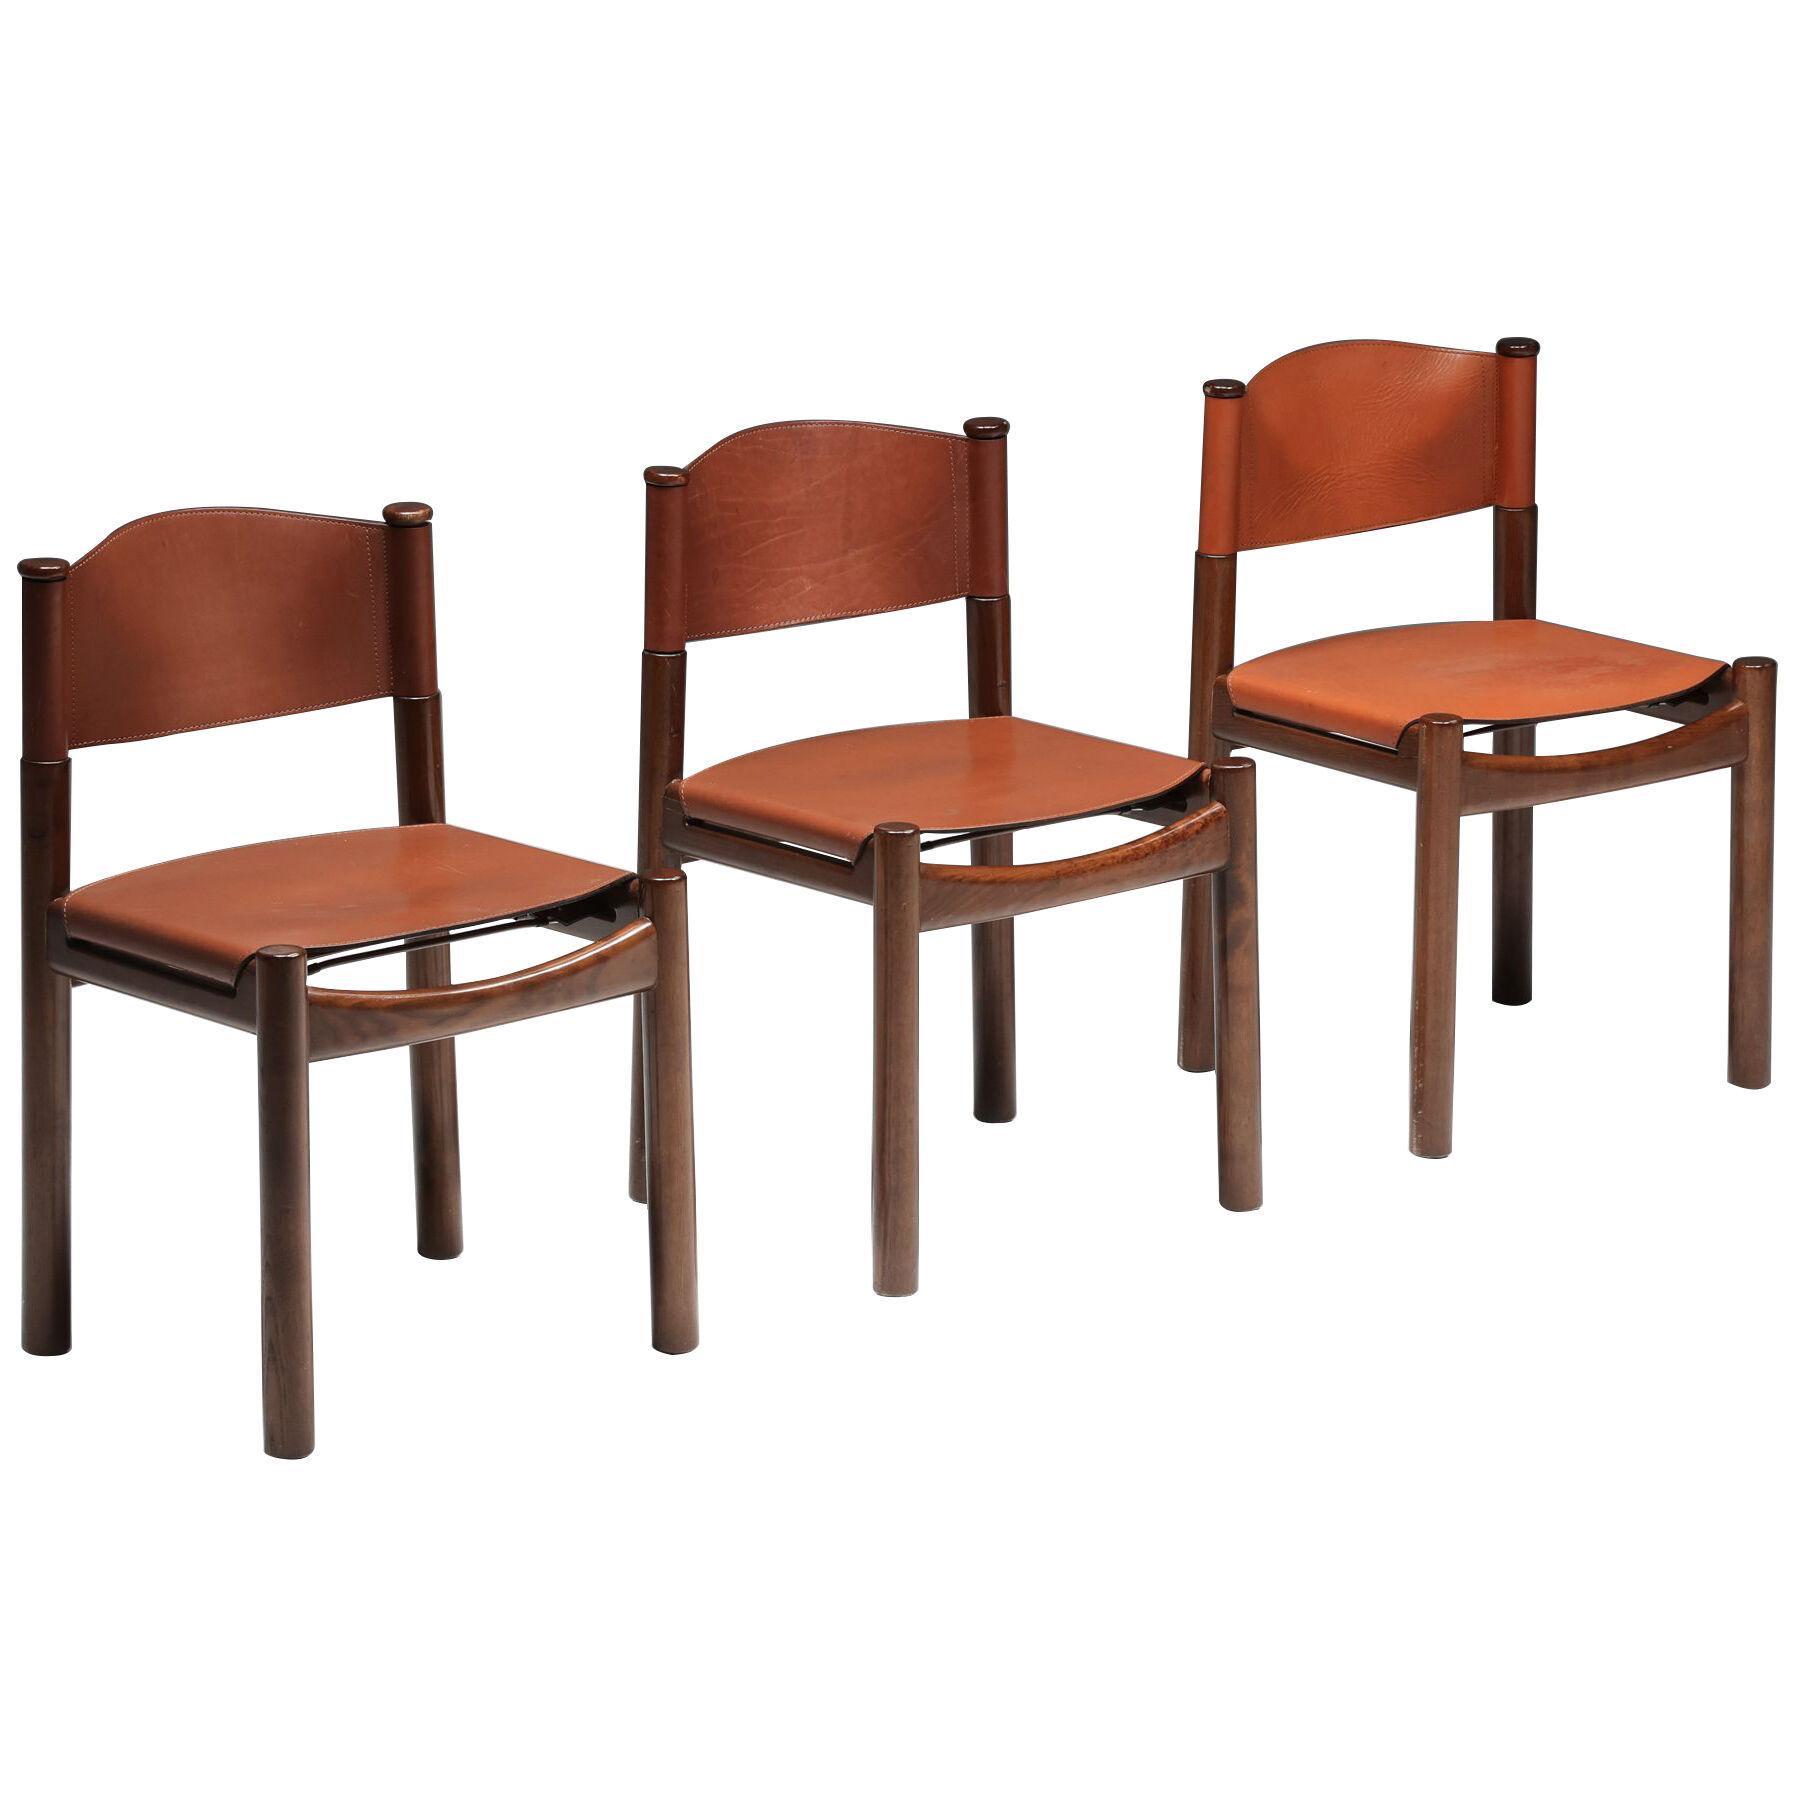 Scarpa Inspired Walnut & Leather Dining Chairs Set of Three - 1950's